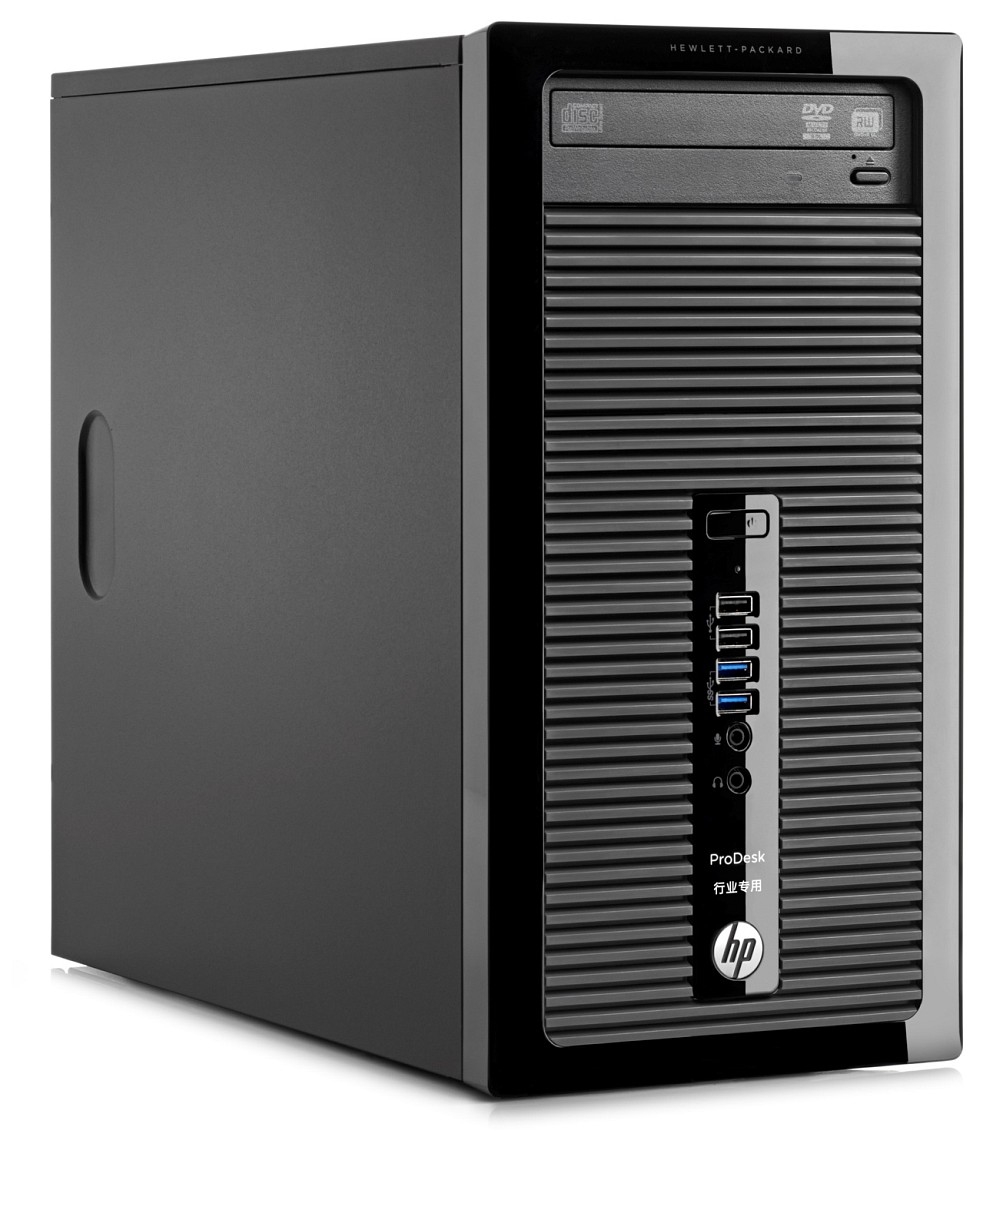 HP-ProDesk-400-g3-i3-4go-2to-HDD-w10